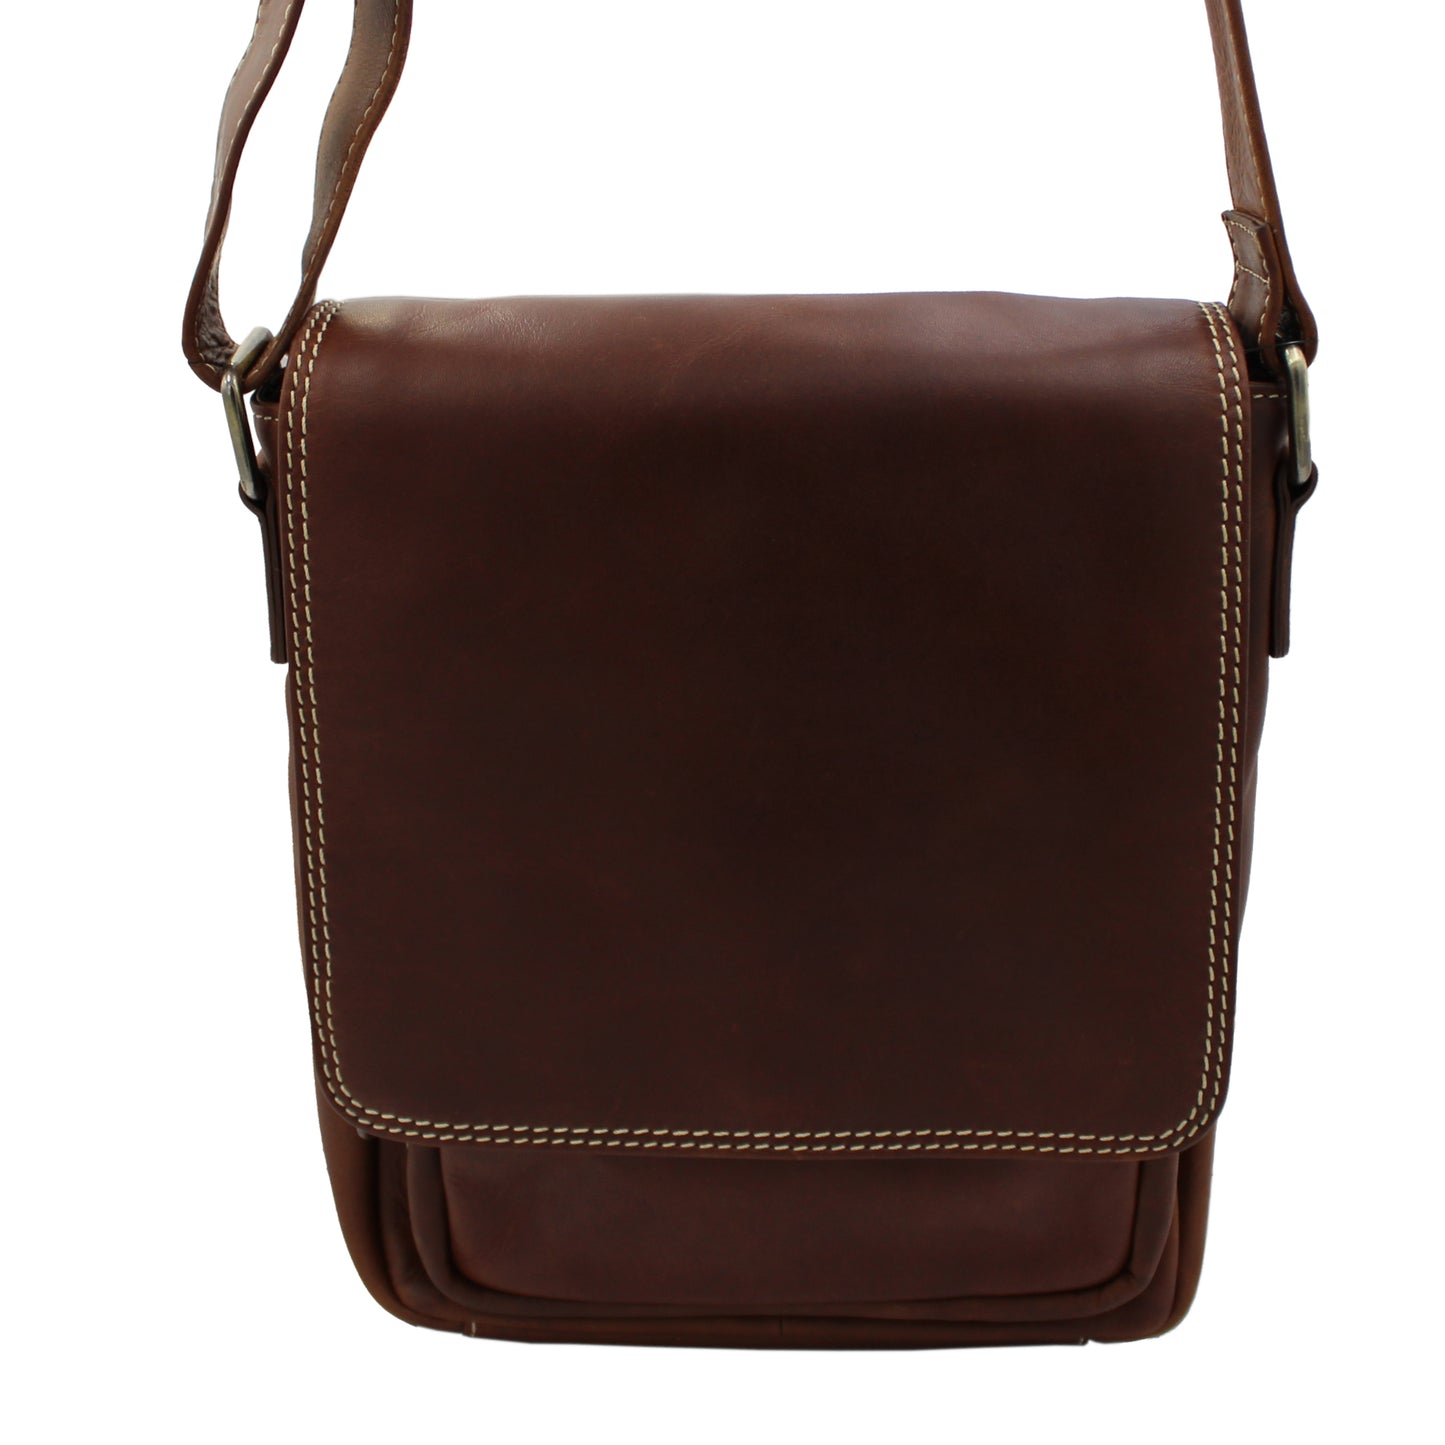 RE Leather Bag (9.5"x 10.5"x 2.5")